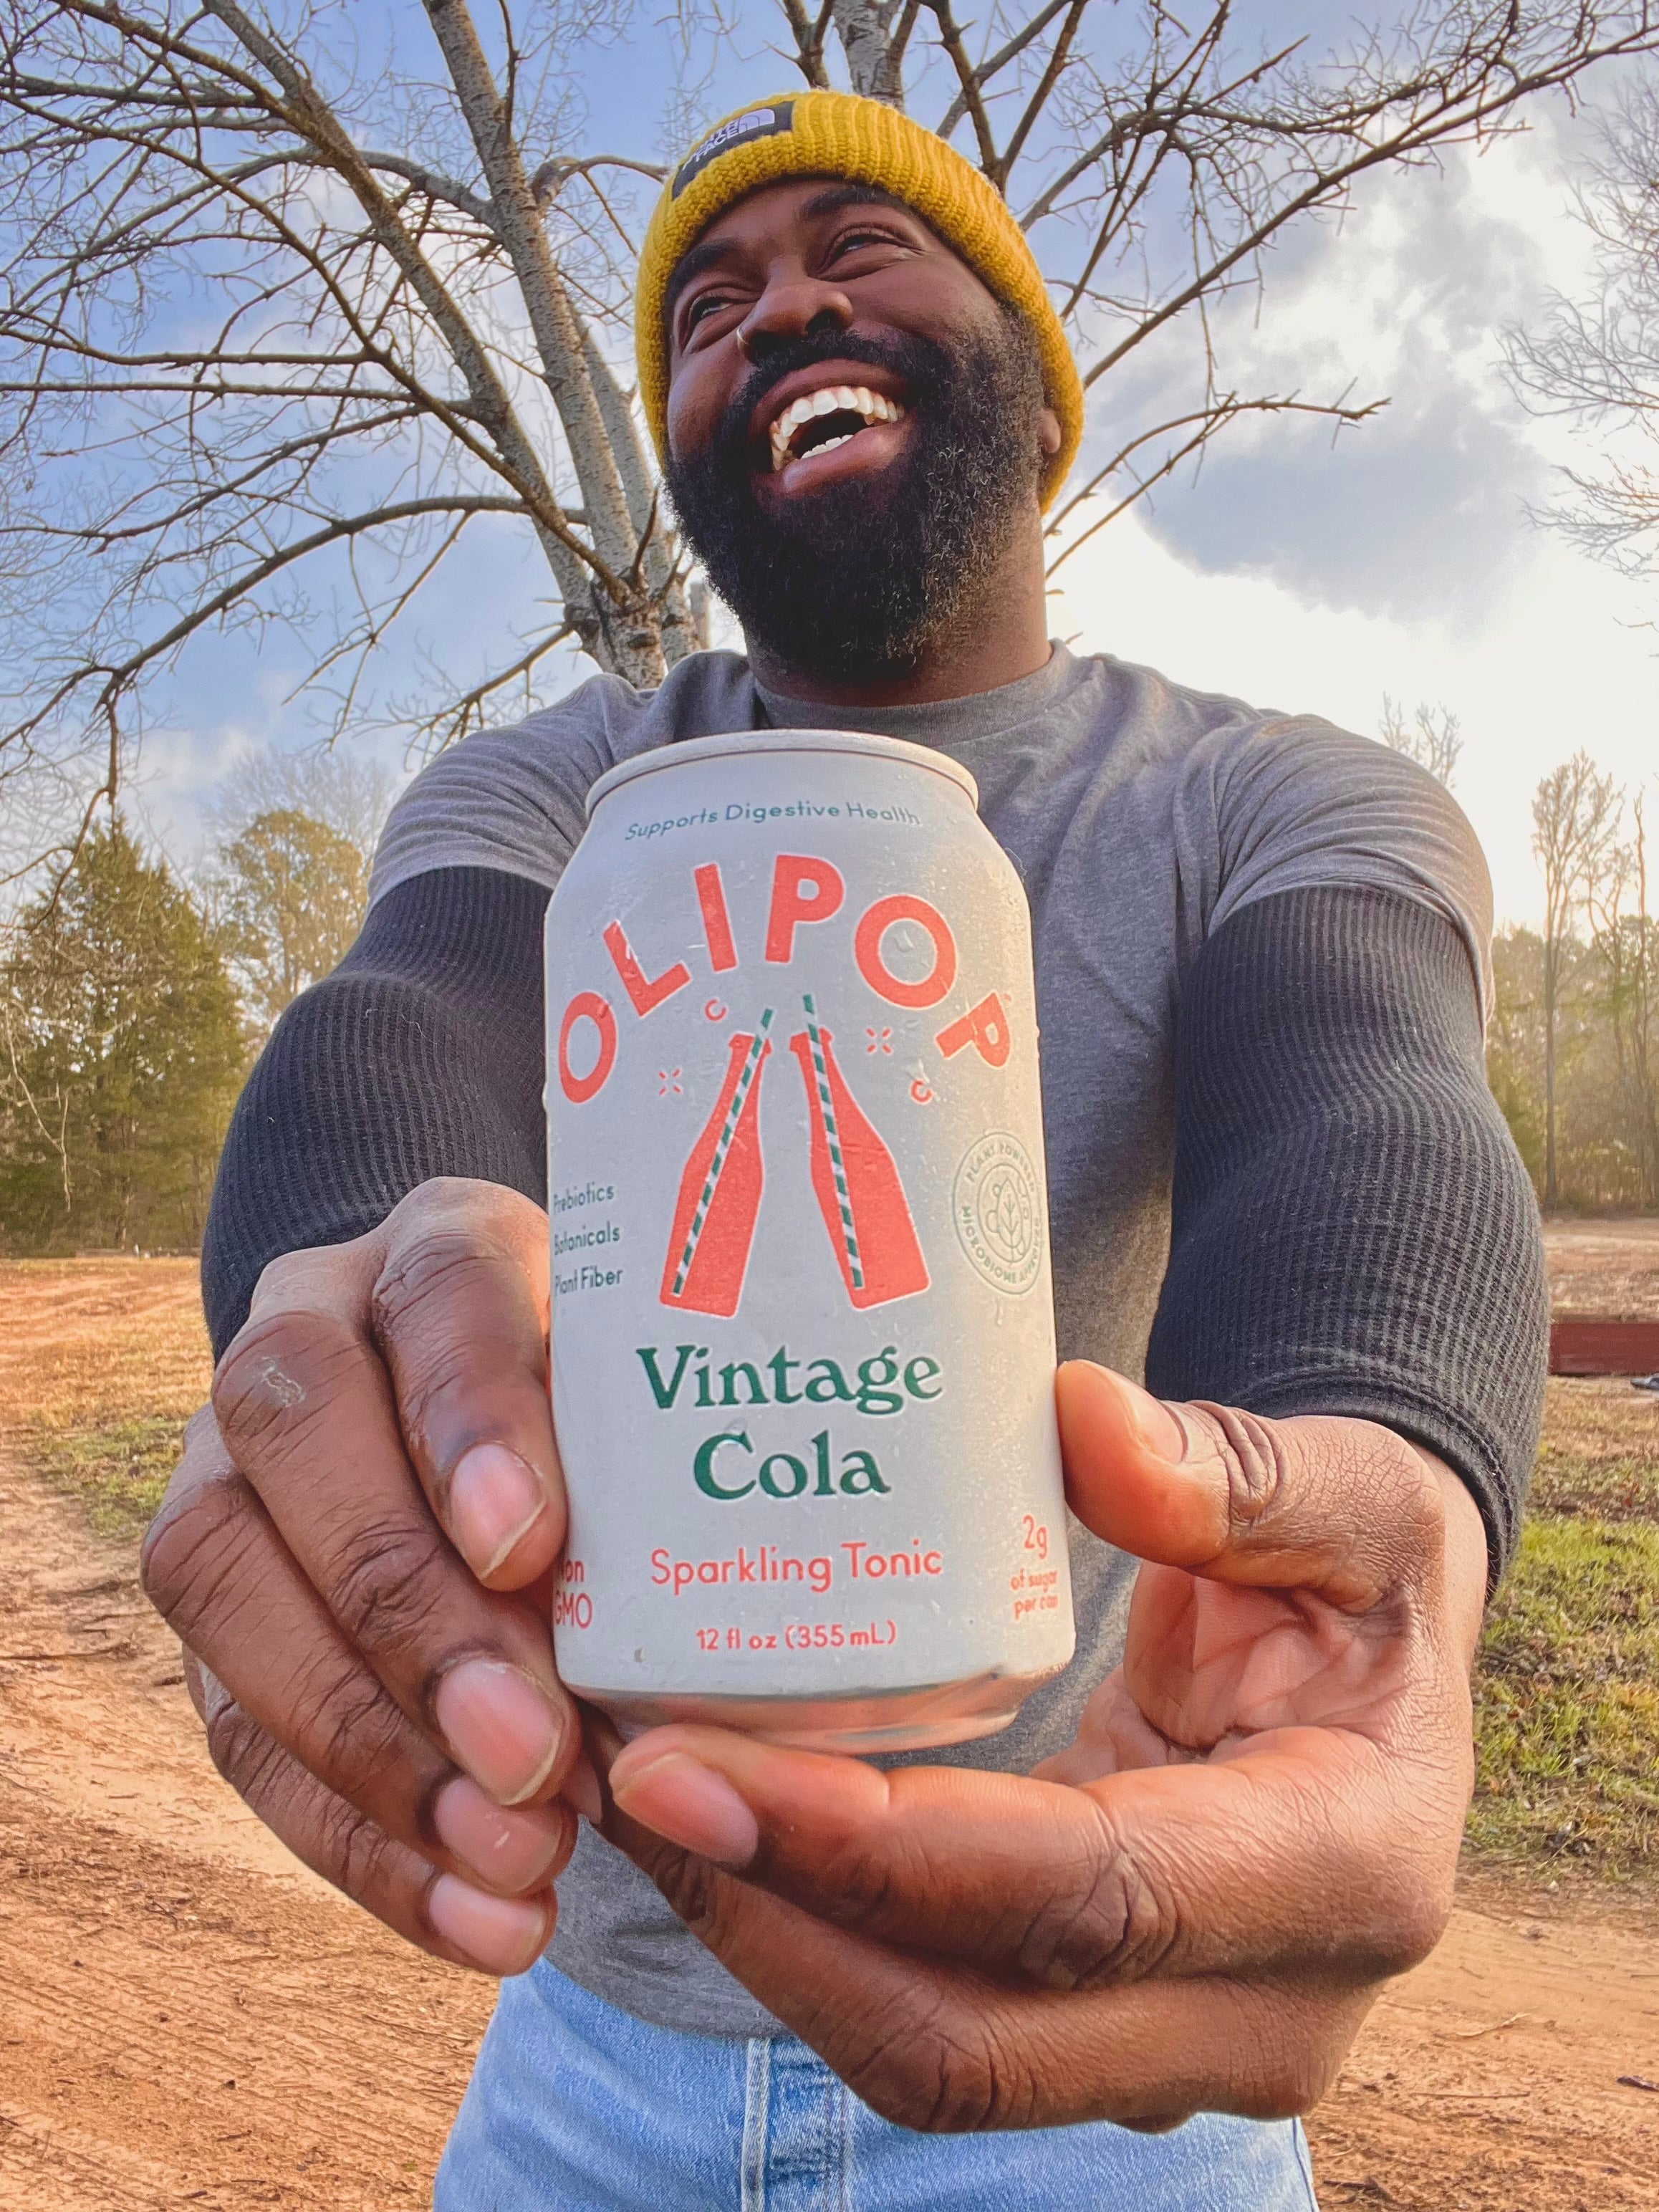 Instagram Influencer Will holding a can of Vintage Cola OLIPOP